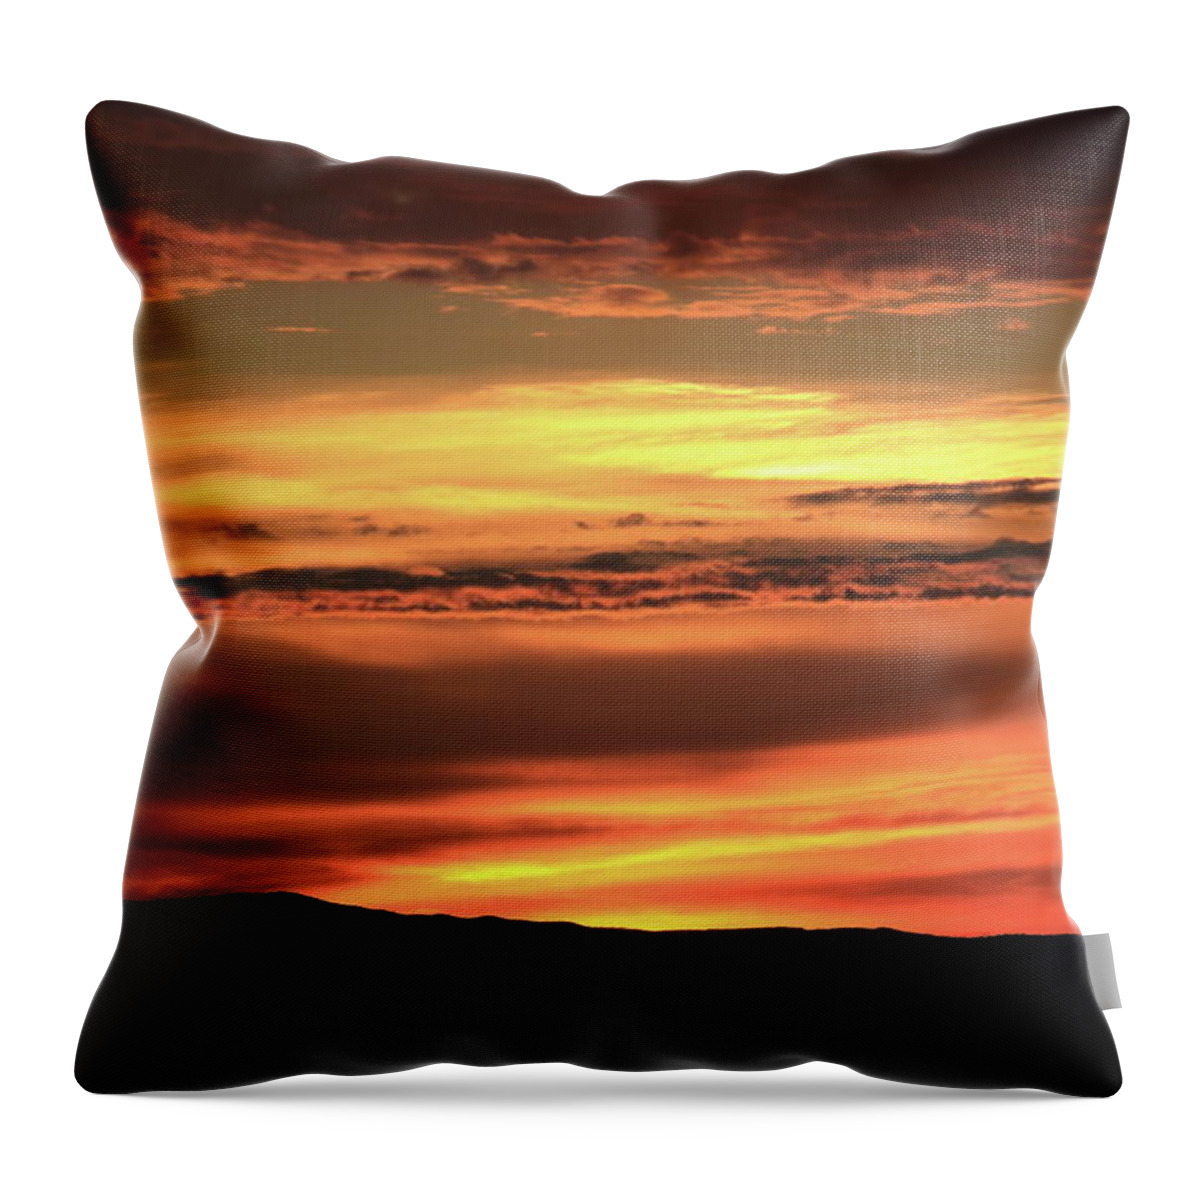 Sunrise Throw Pillow featuring the photograph New Mexico Sunrise by David Diaz